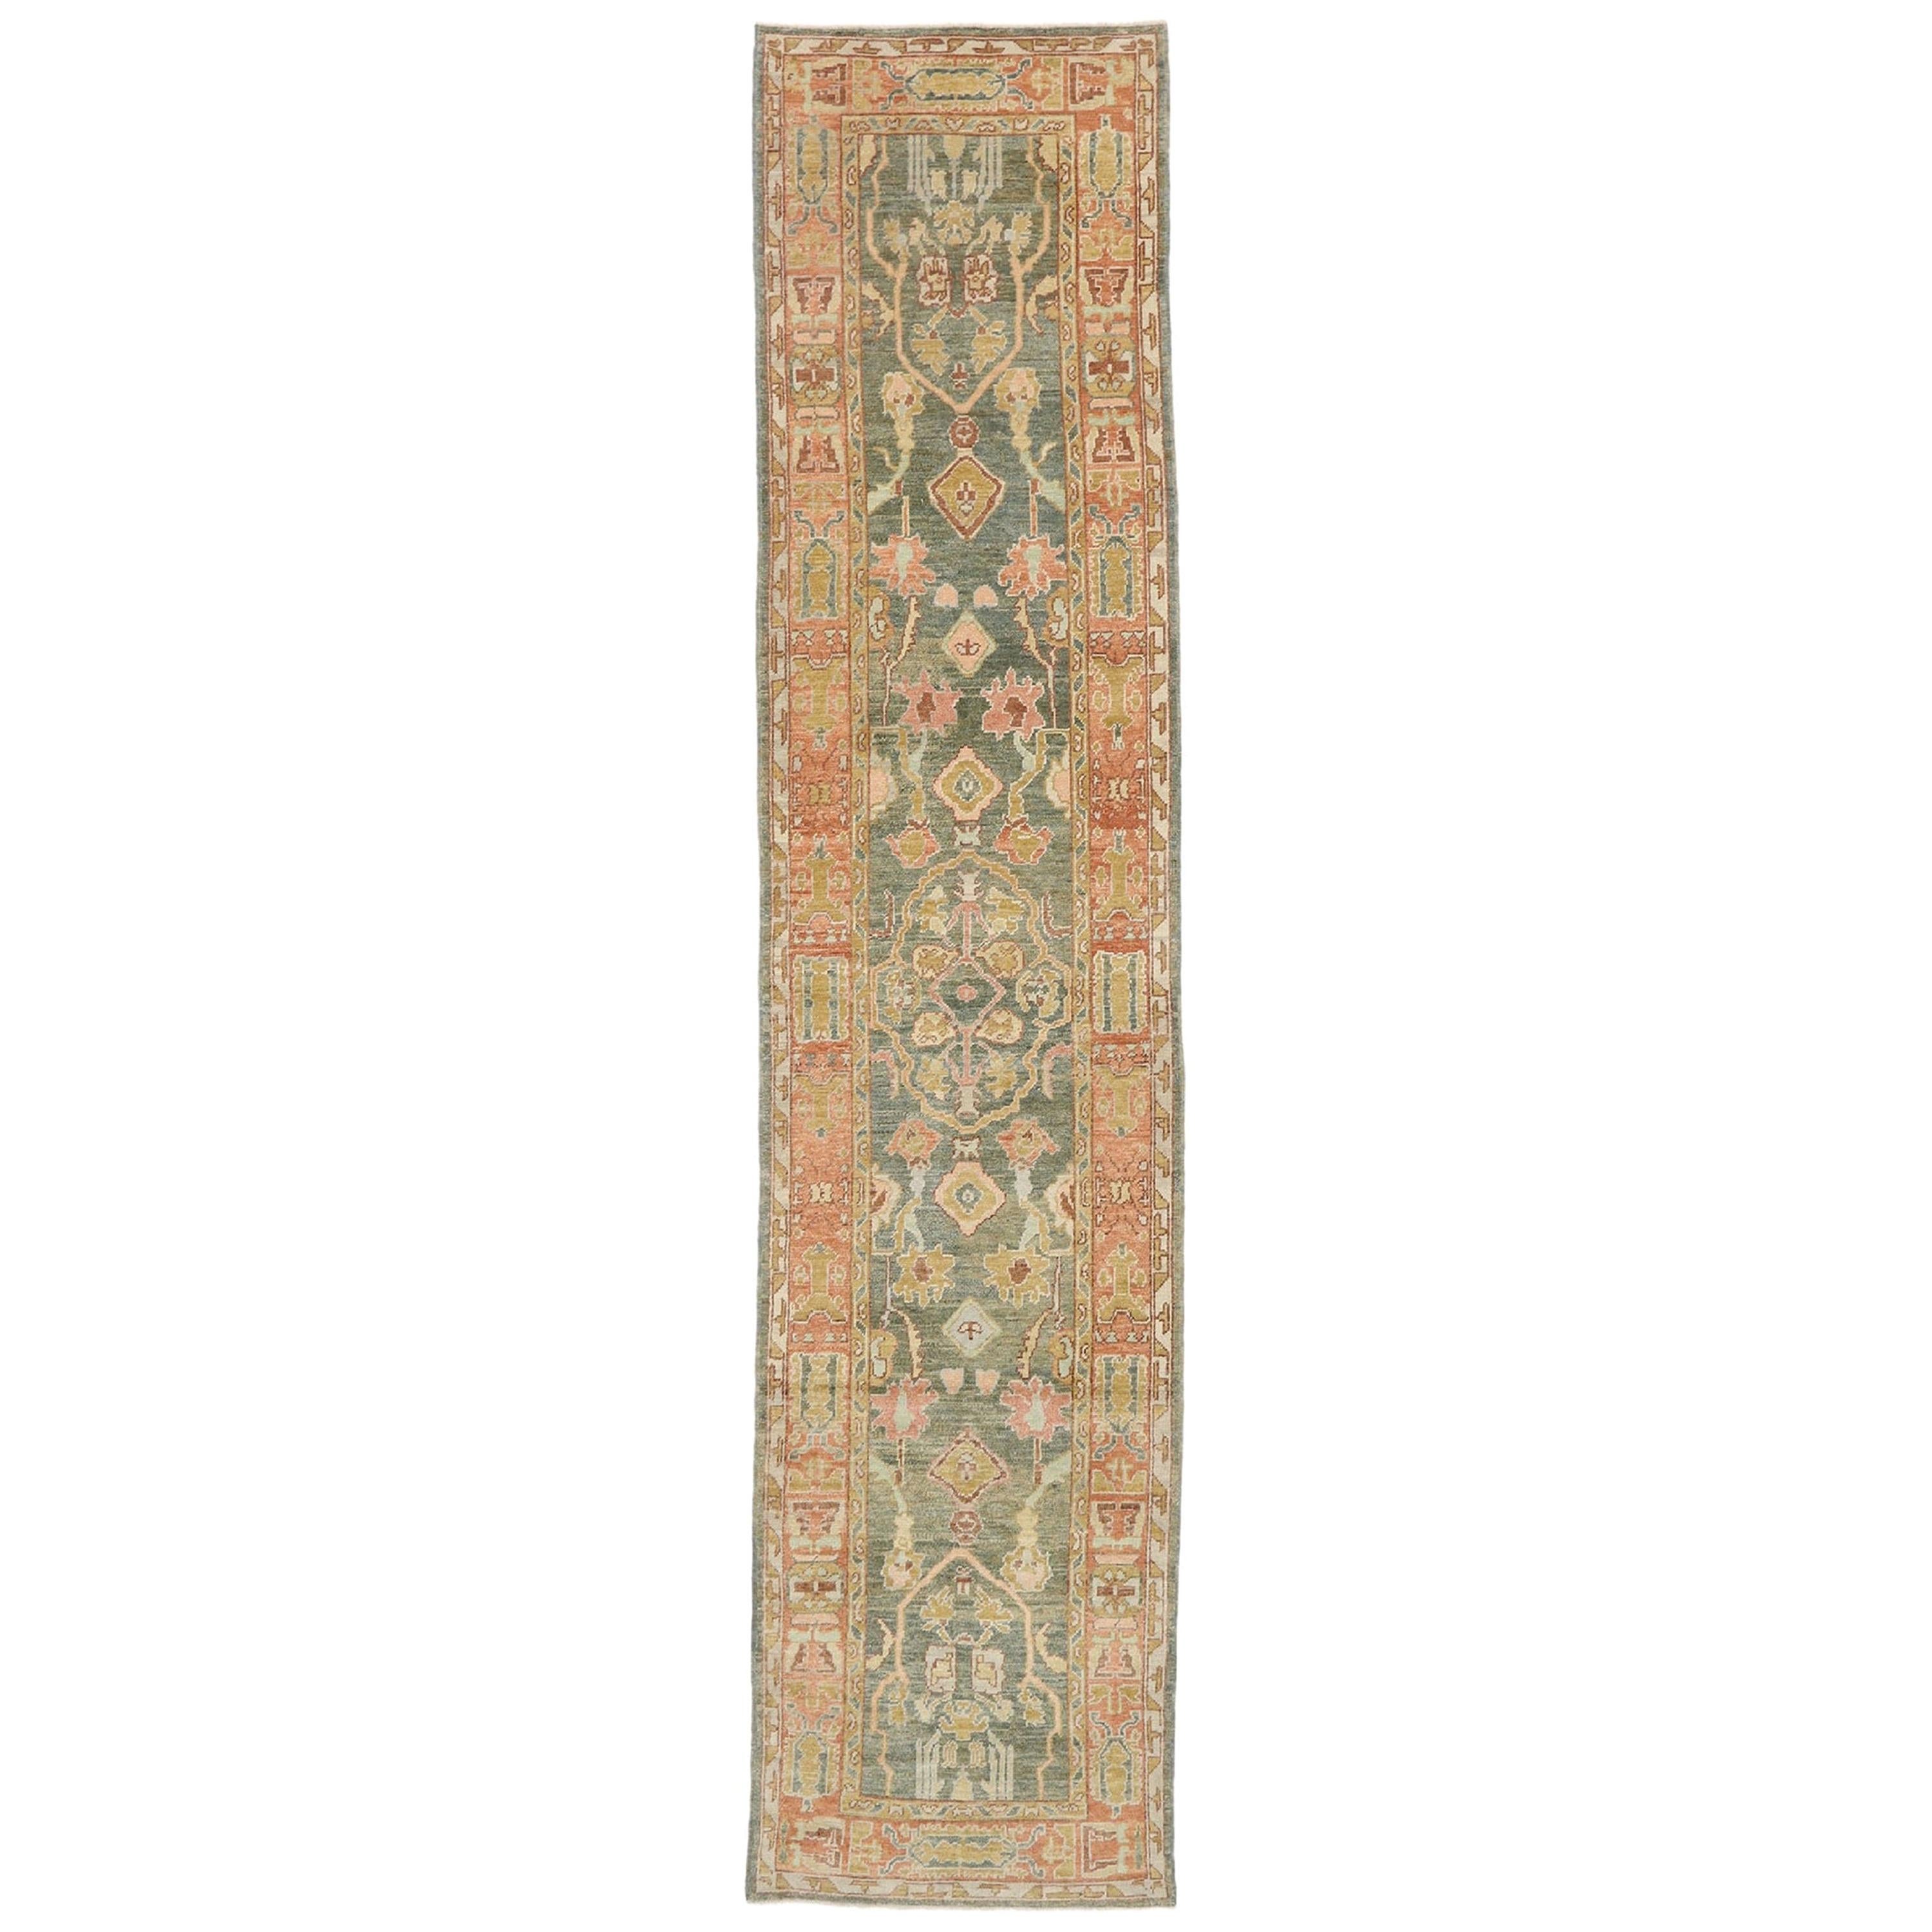 New Contemporary Turkish Oushak Runner with Modern Spanish Revival Style